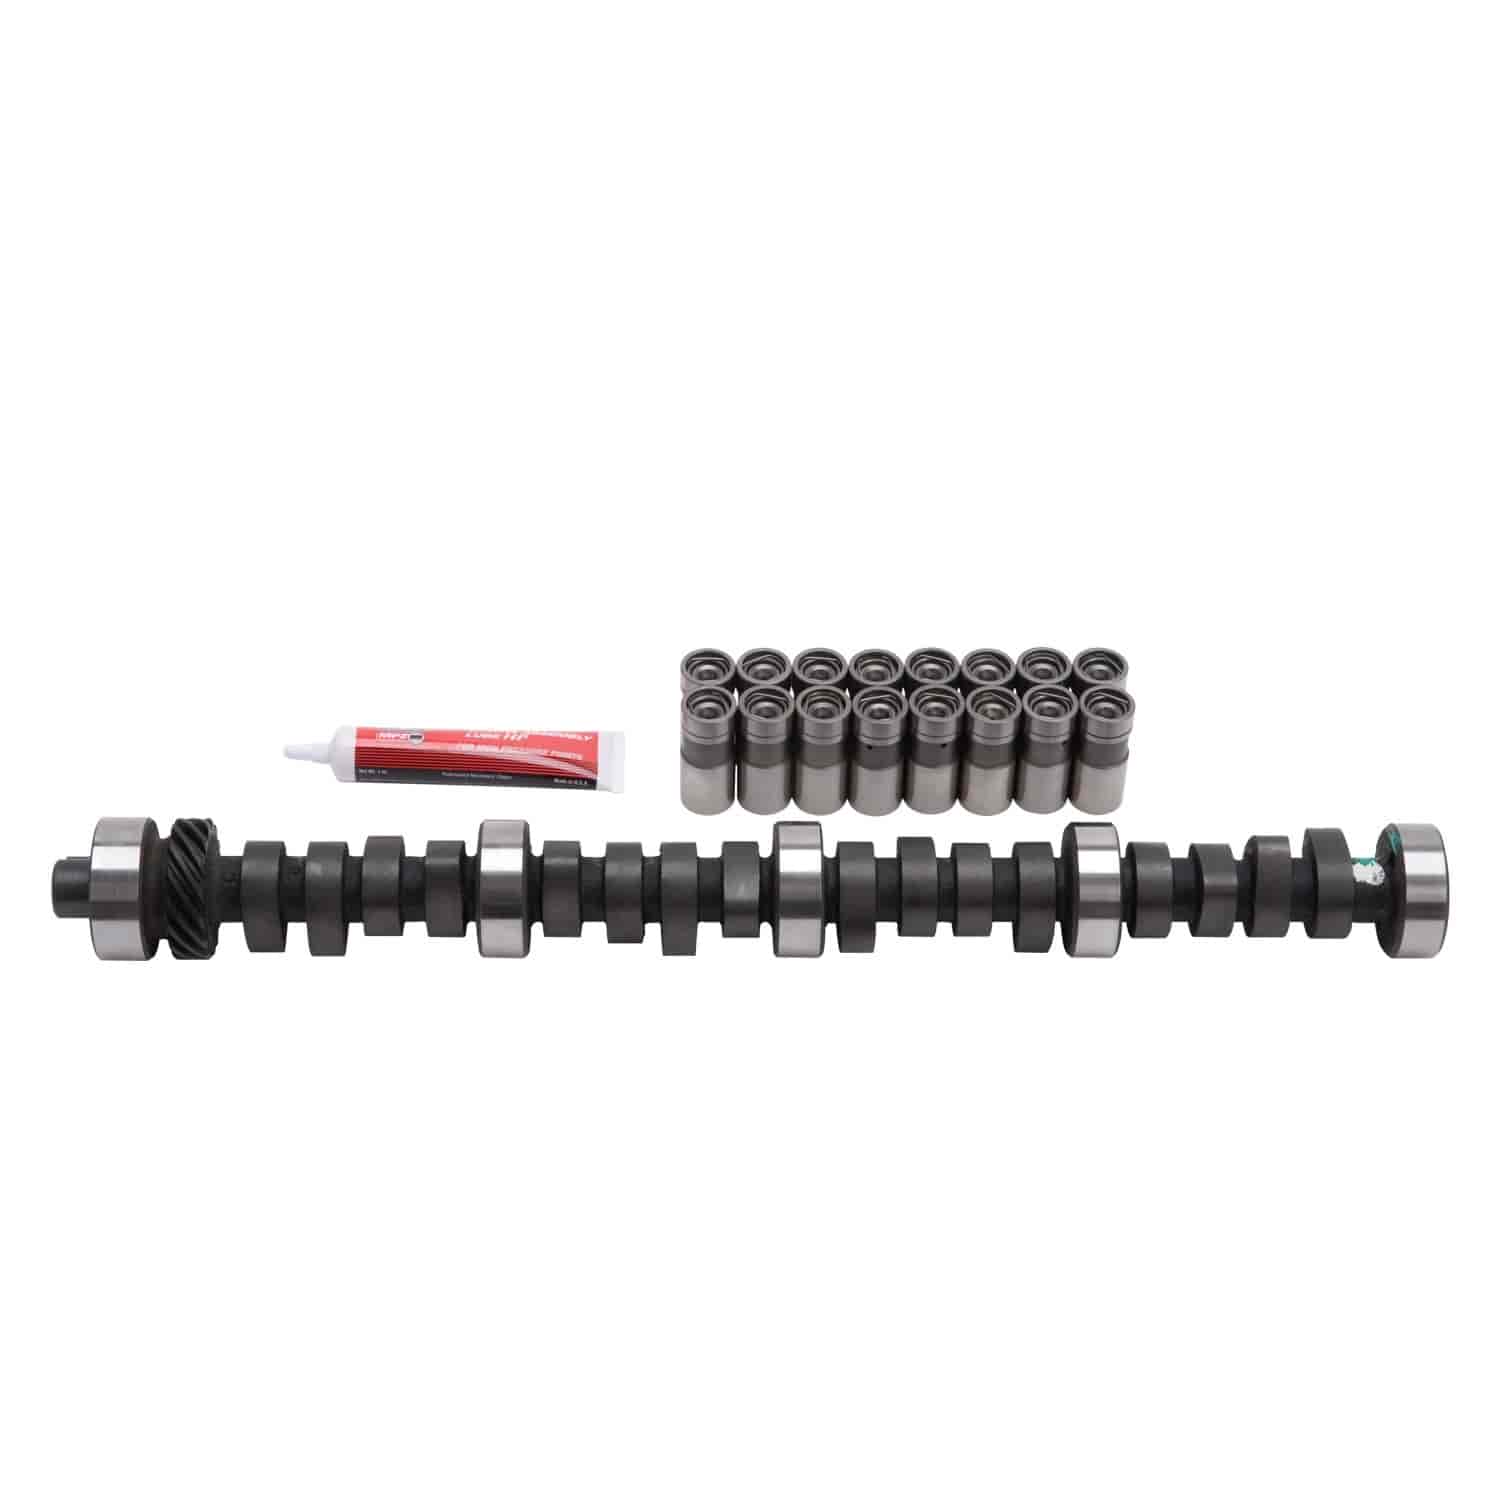 Performer-Plus Camshaft Kit for Small Block Ford 351W